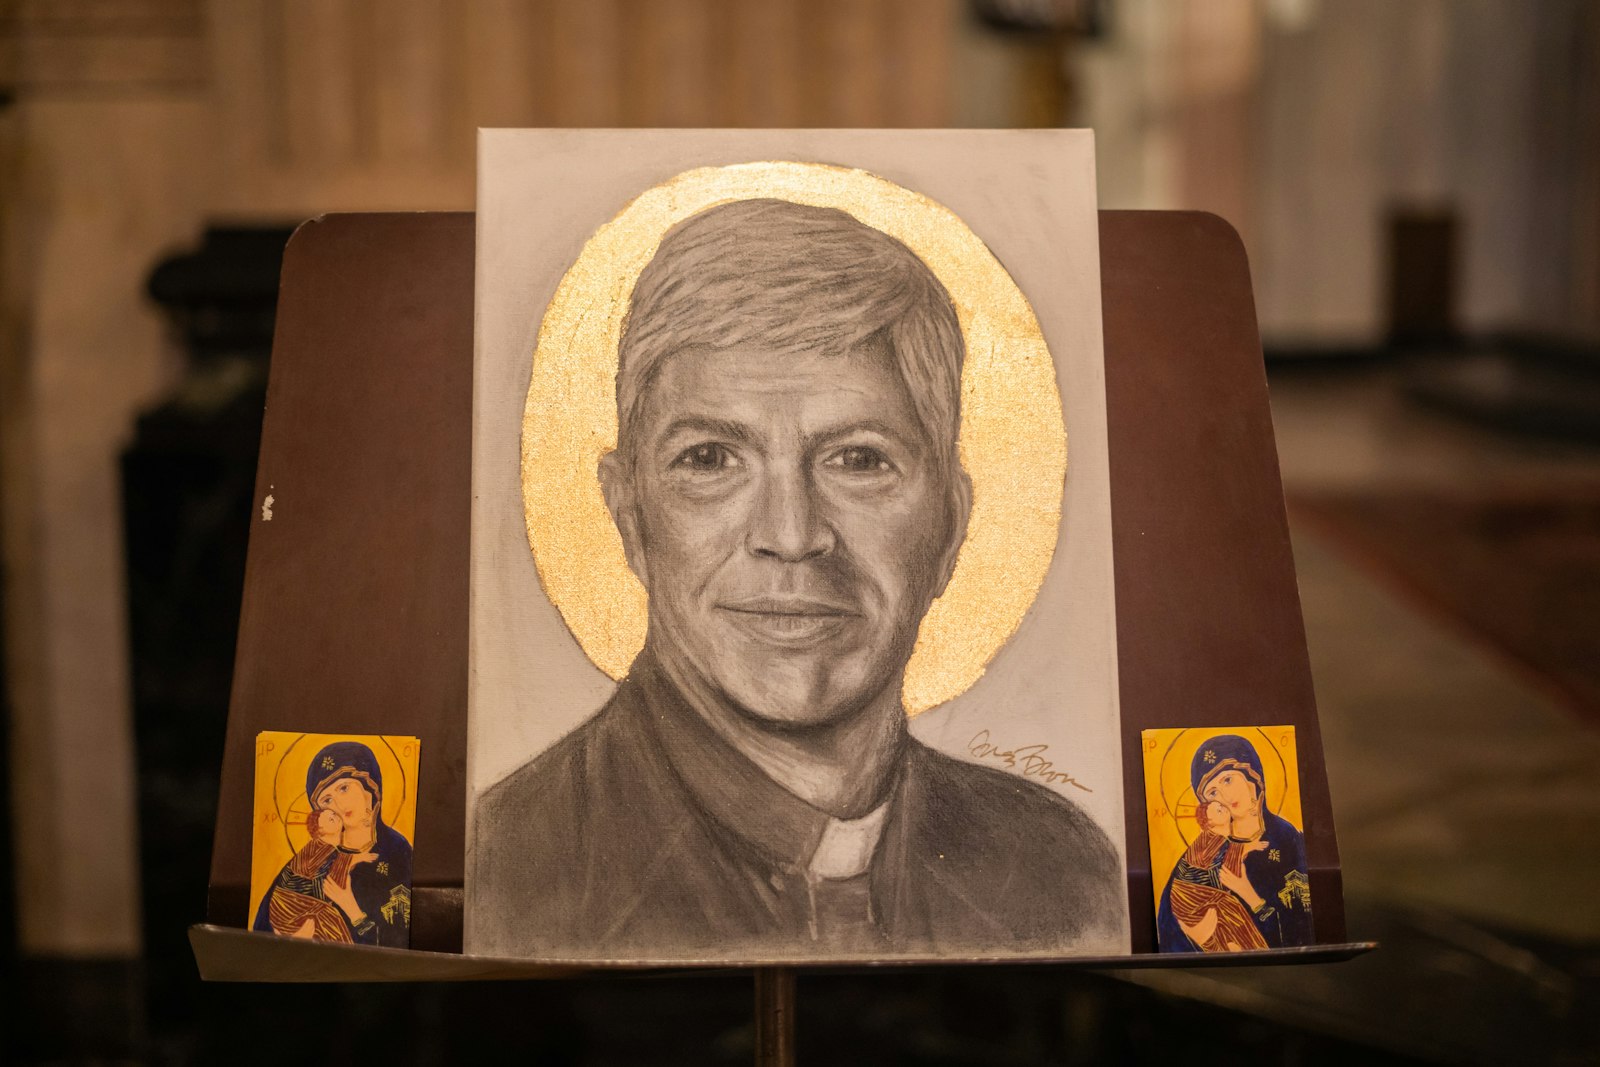 Brown said it took her approximately one day to make the black and white charcoal portrait. She used the image from Msgr. Trapp's funeral program as a reference.